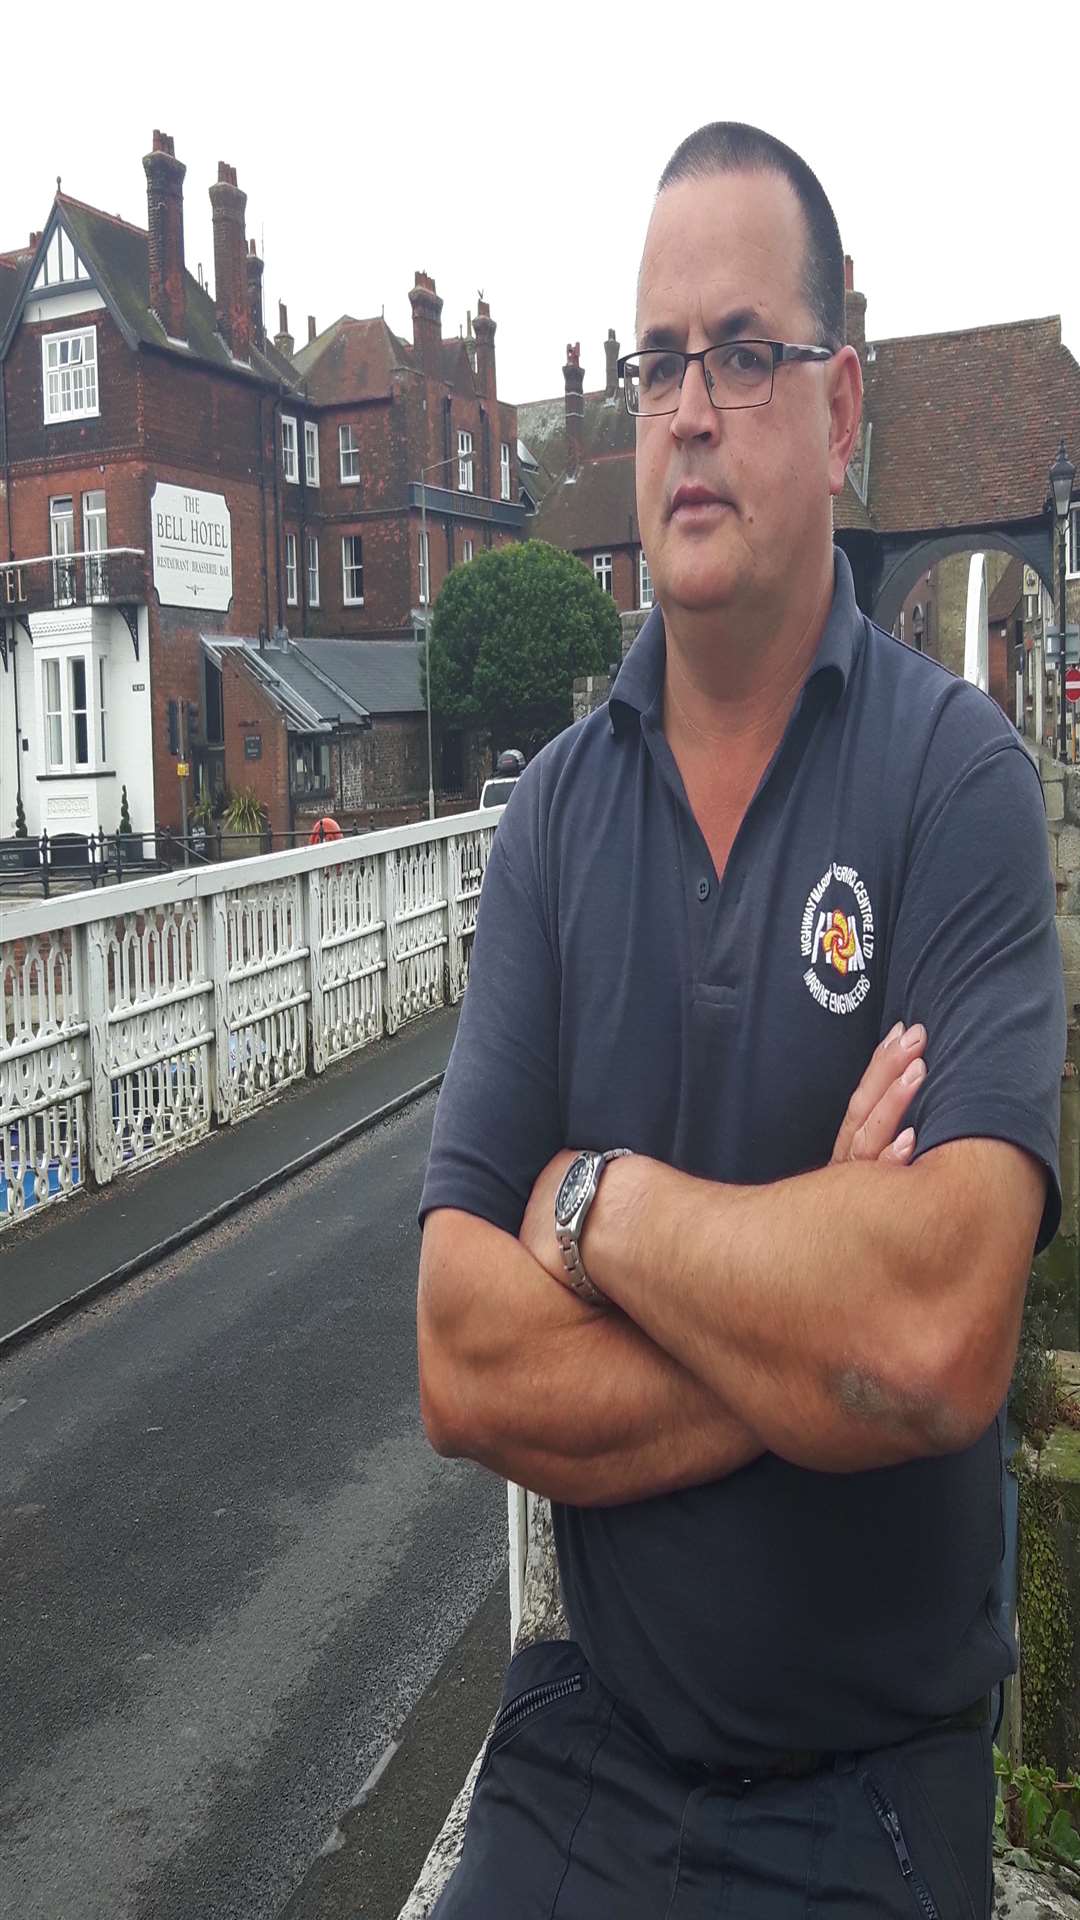 Paul Cantle of Highway Marine Service Centre in Sandwich is against the potential closure of the toll bridge